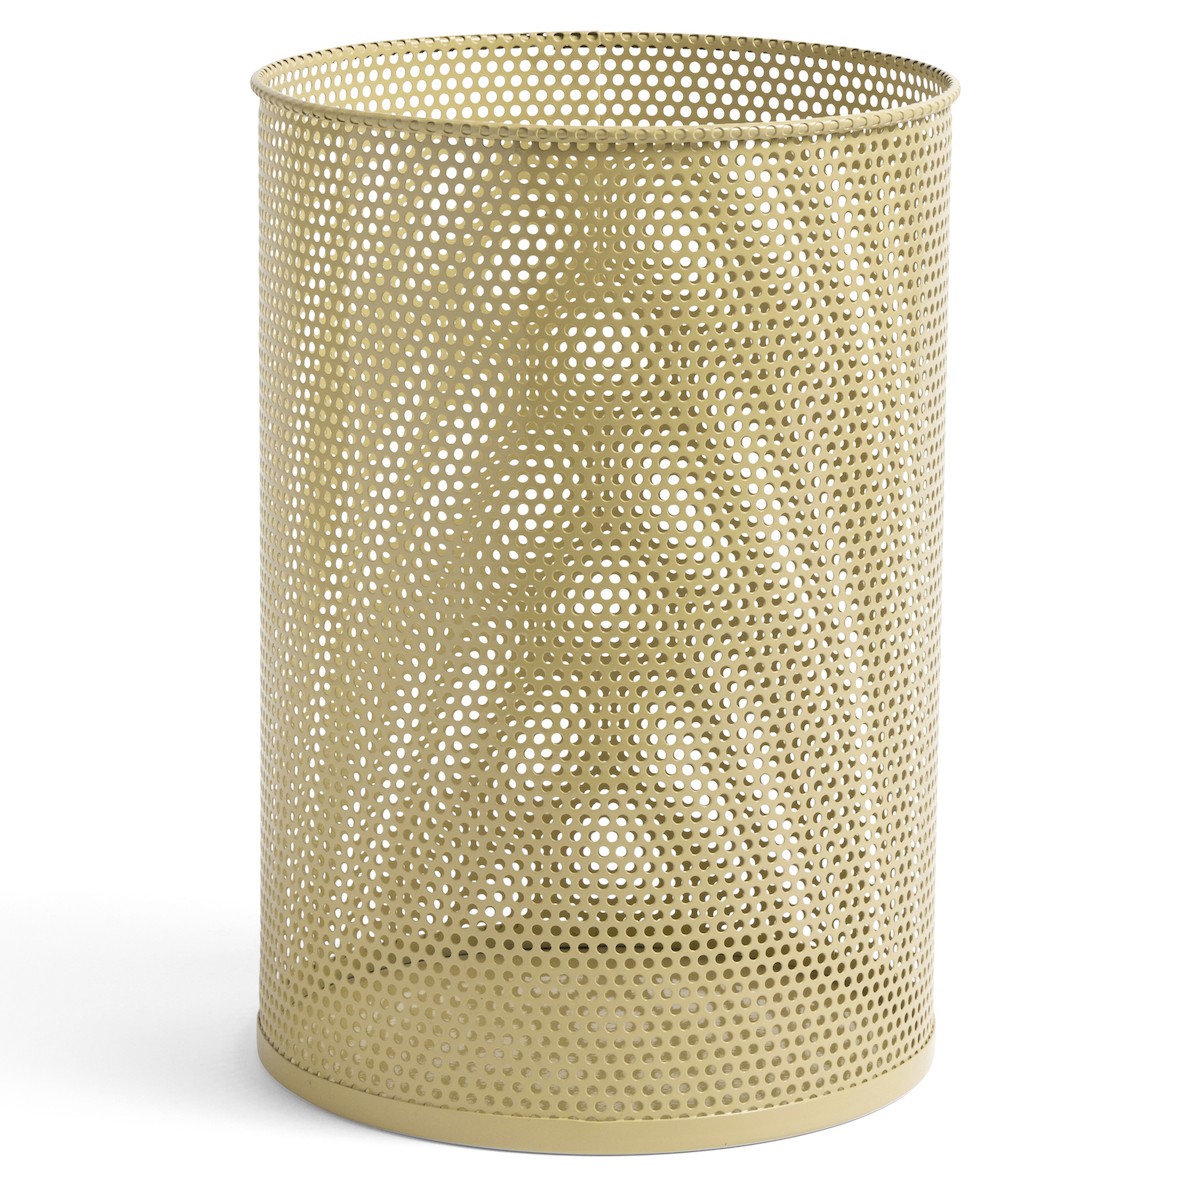 EPUISE - H44 x Ø30,5 cm - Dusty Yellow - Perforated Bin L